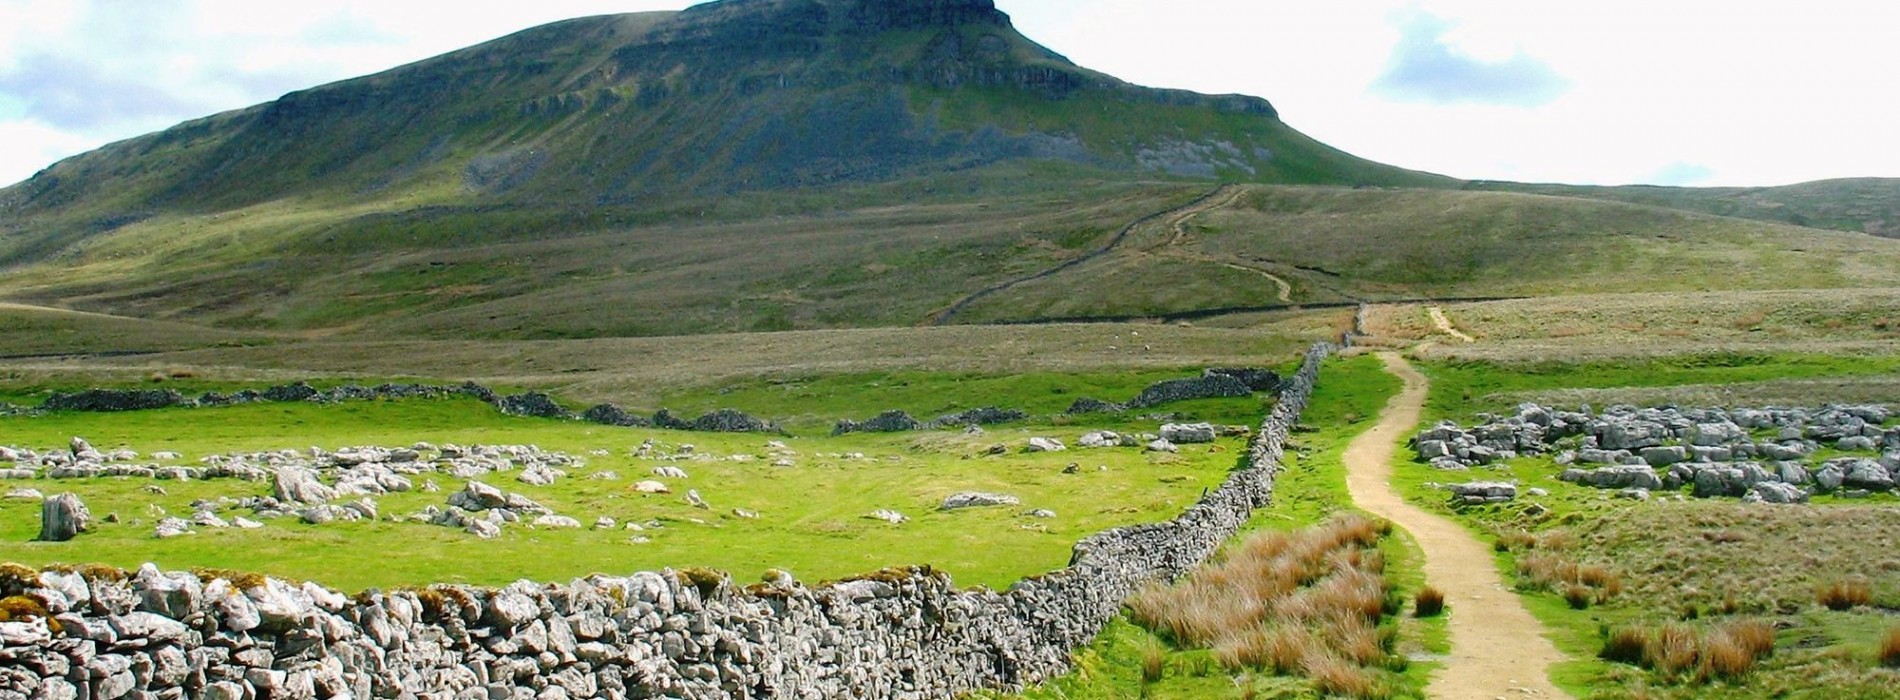 Stone_wall_lined_path_to_Yorkshire_Peak.jpg